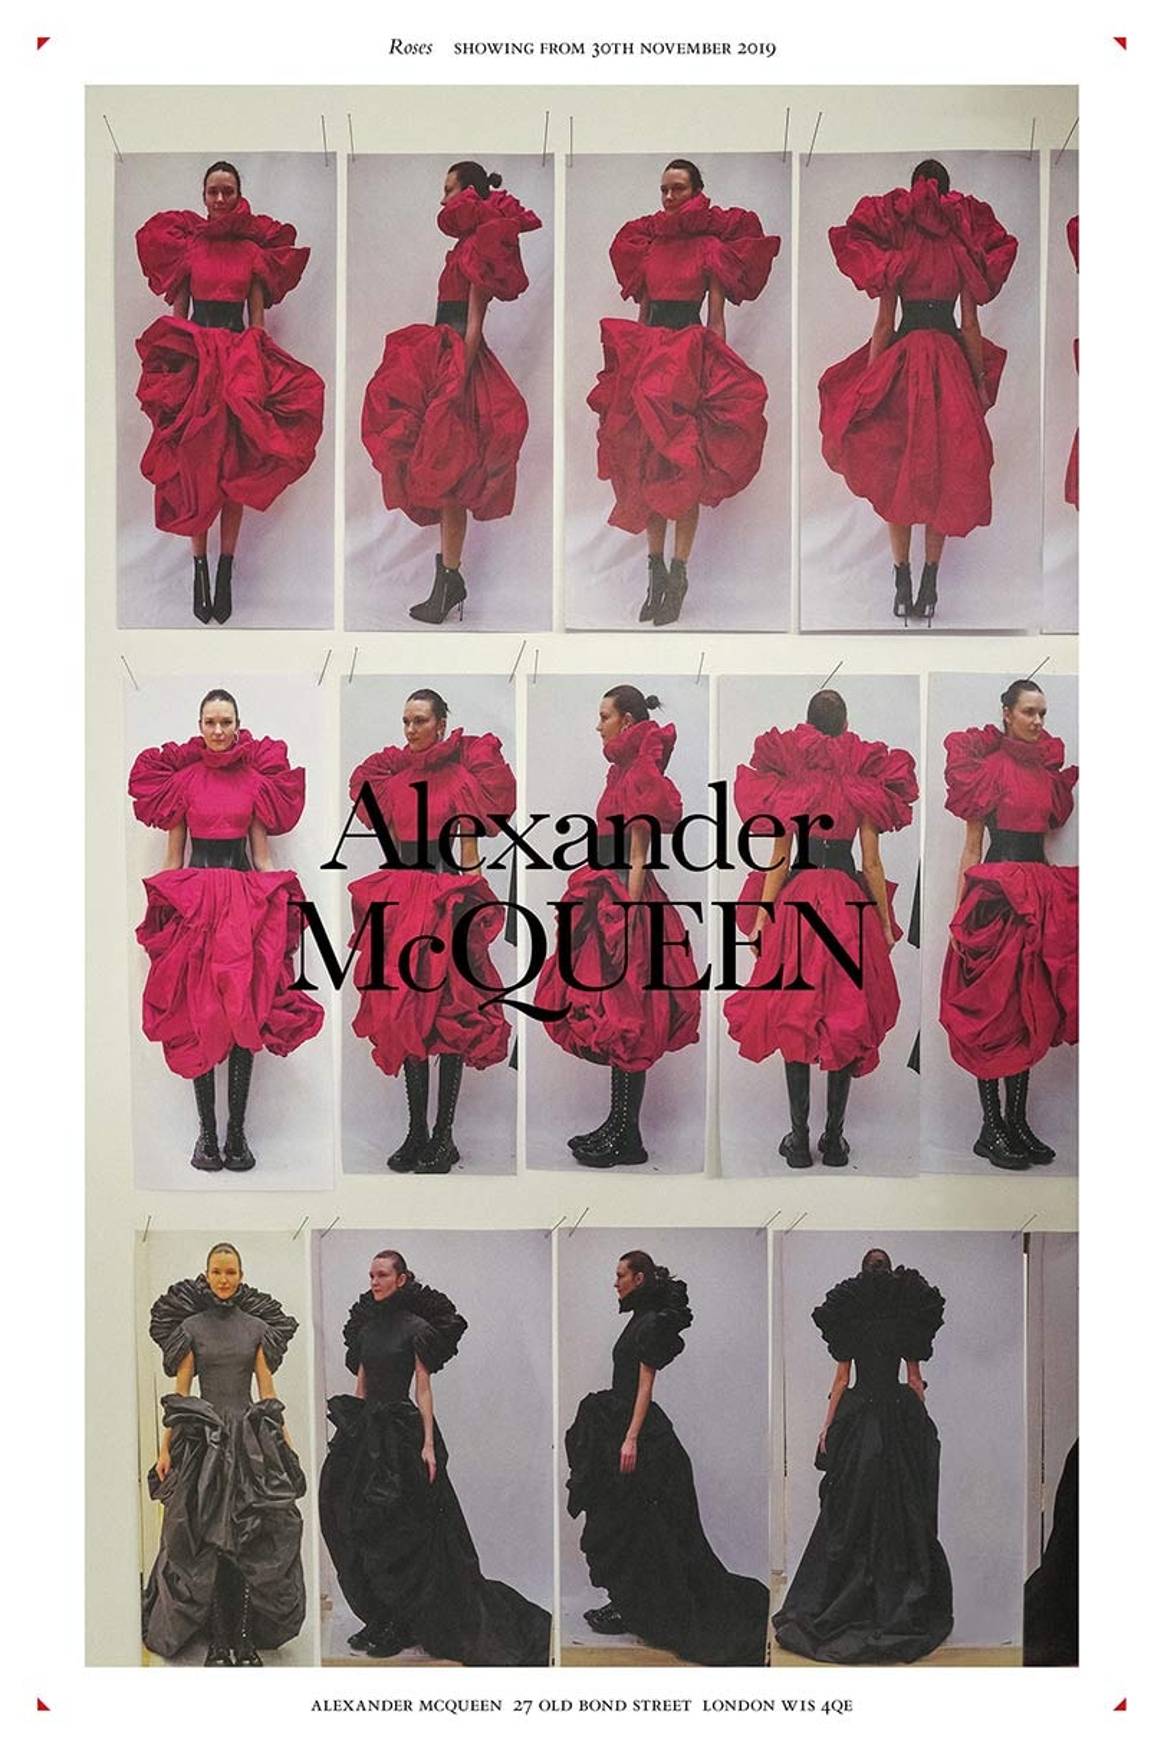 Alexander McQueen opens 'Roses' exhibition at London flagship